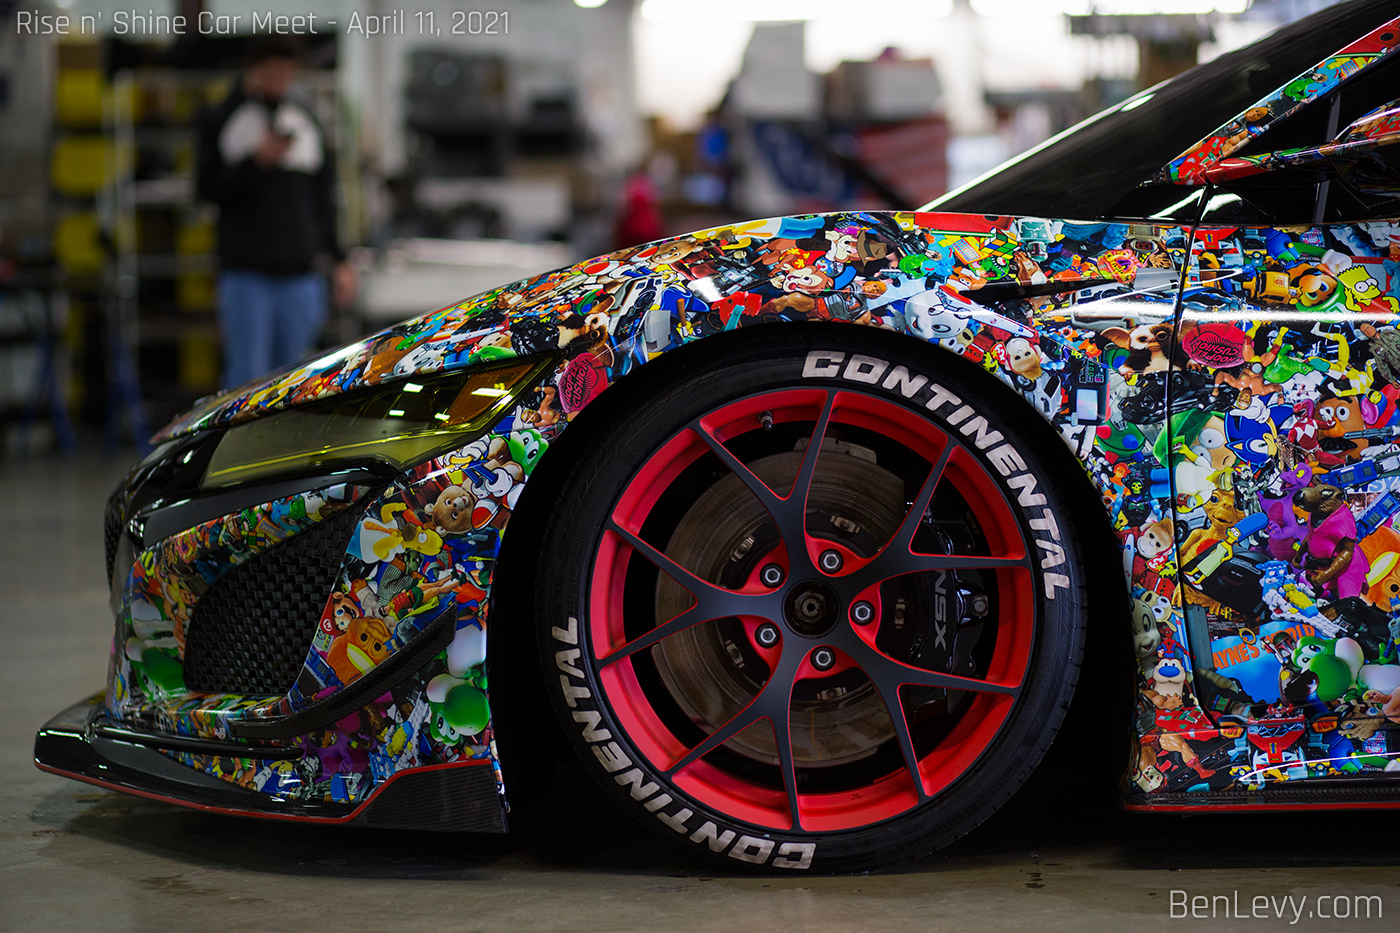 Stickerbombed Acura NSX at Chicago Auto Pros Lombard